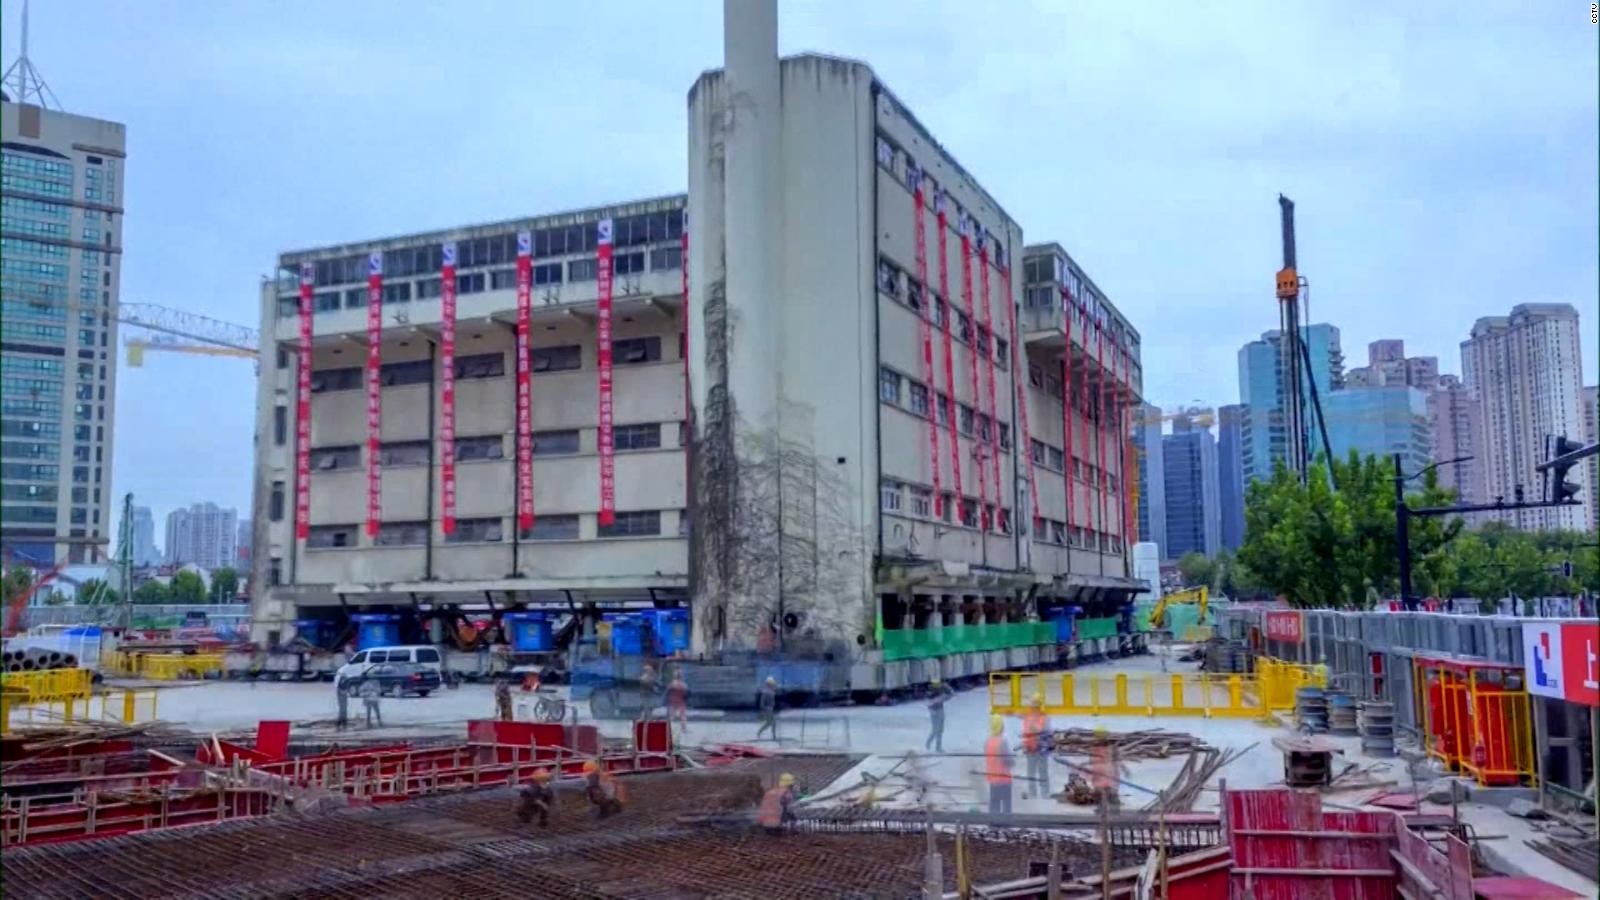 A 5-story building in China 'walks' to new location - CNN Style